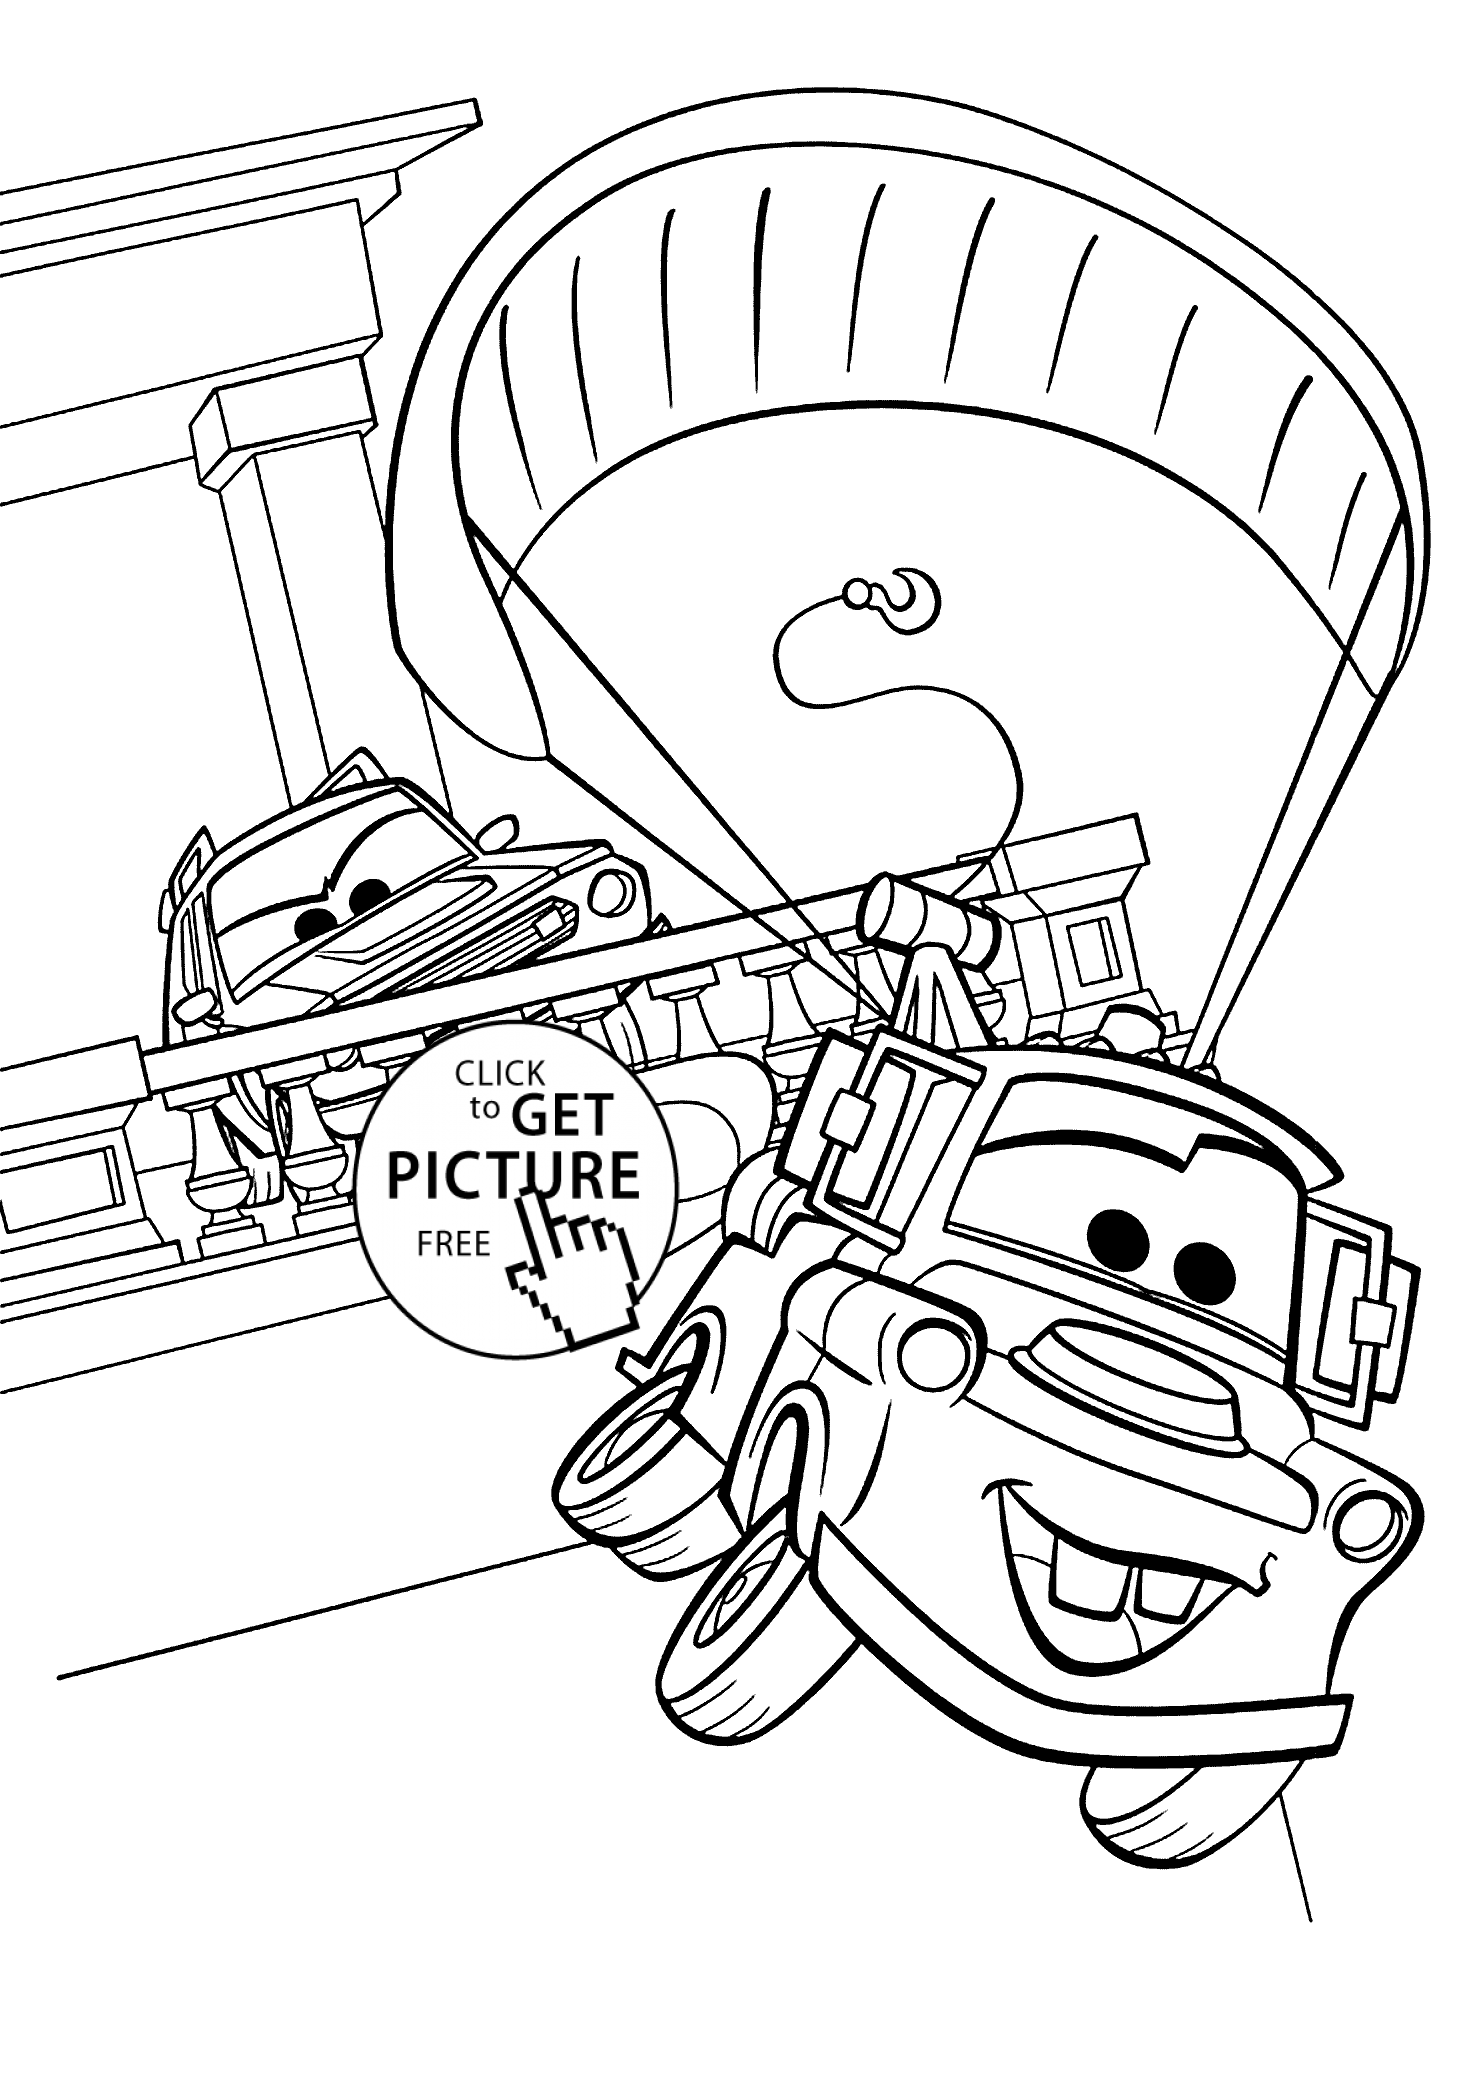 Mater Cars 20 Coloring Pages For Kids, Printable Free   Coloing ...